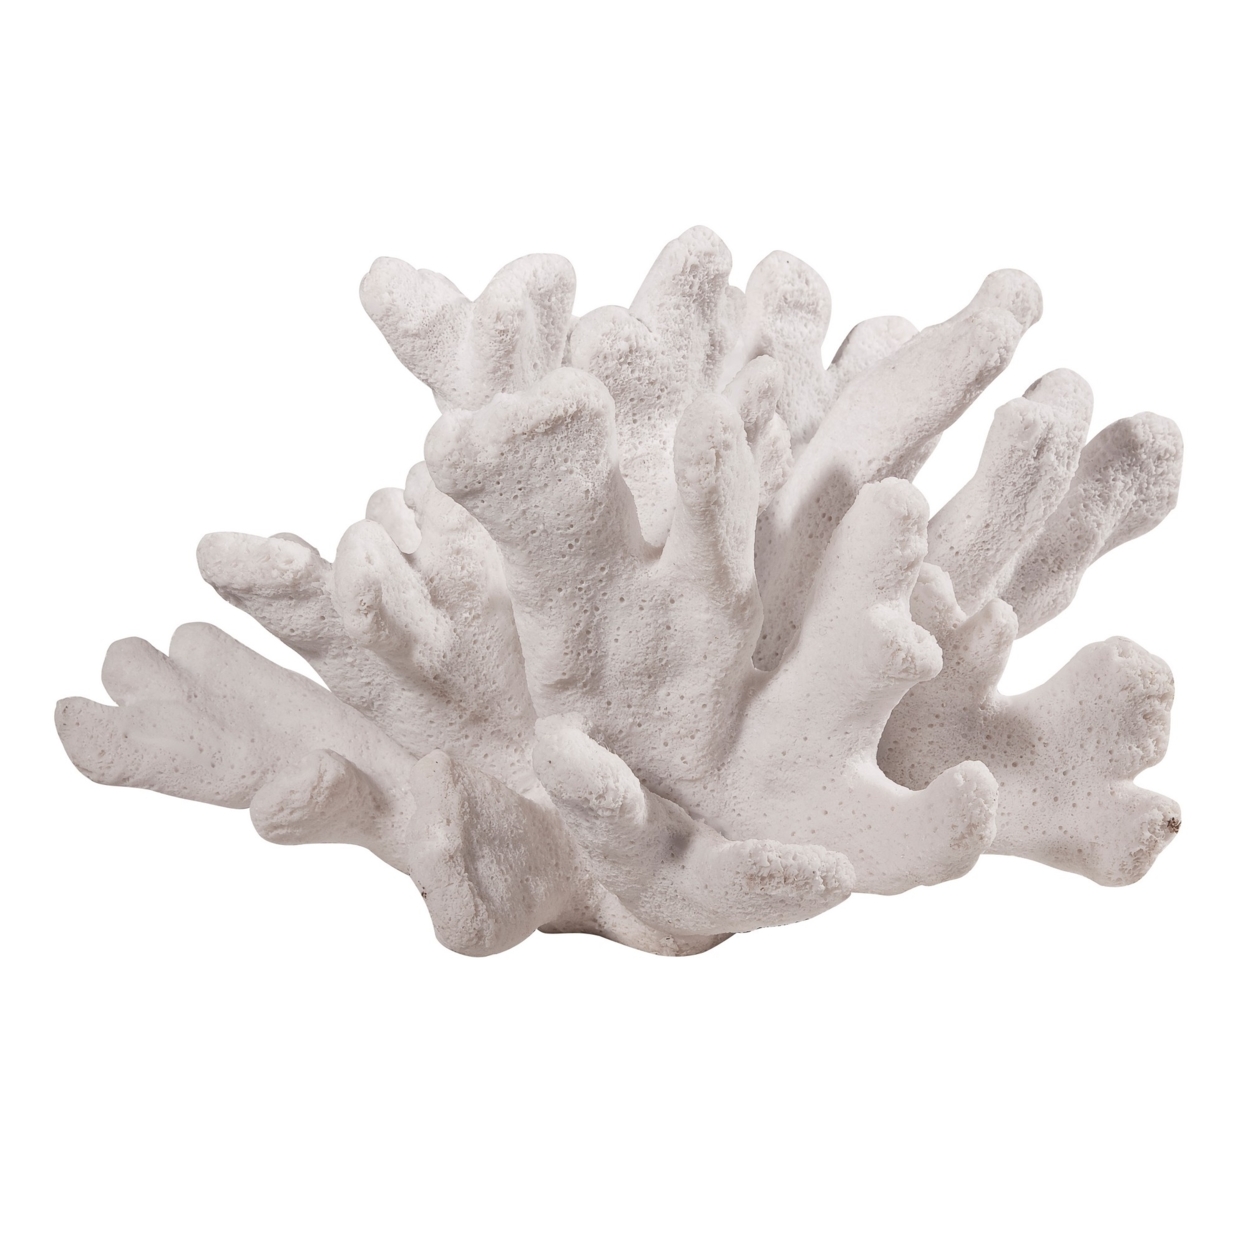 Lily 9 Inch Faux Coral Accent Figurine, Polyresin Tabletop Sculpture, White- Saltoro Sherpi